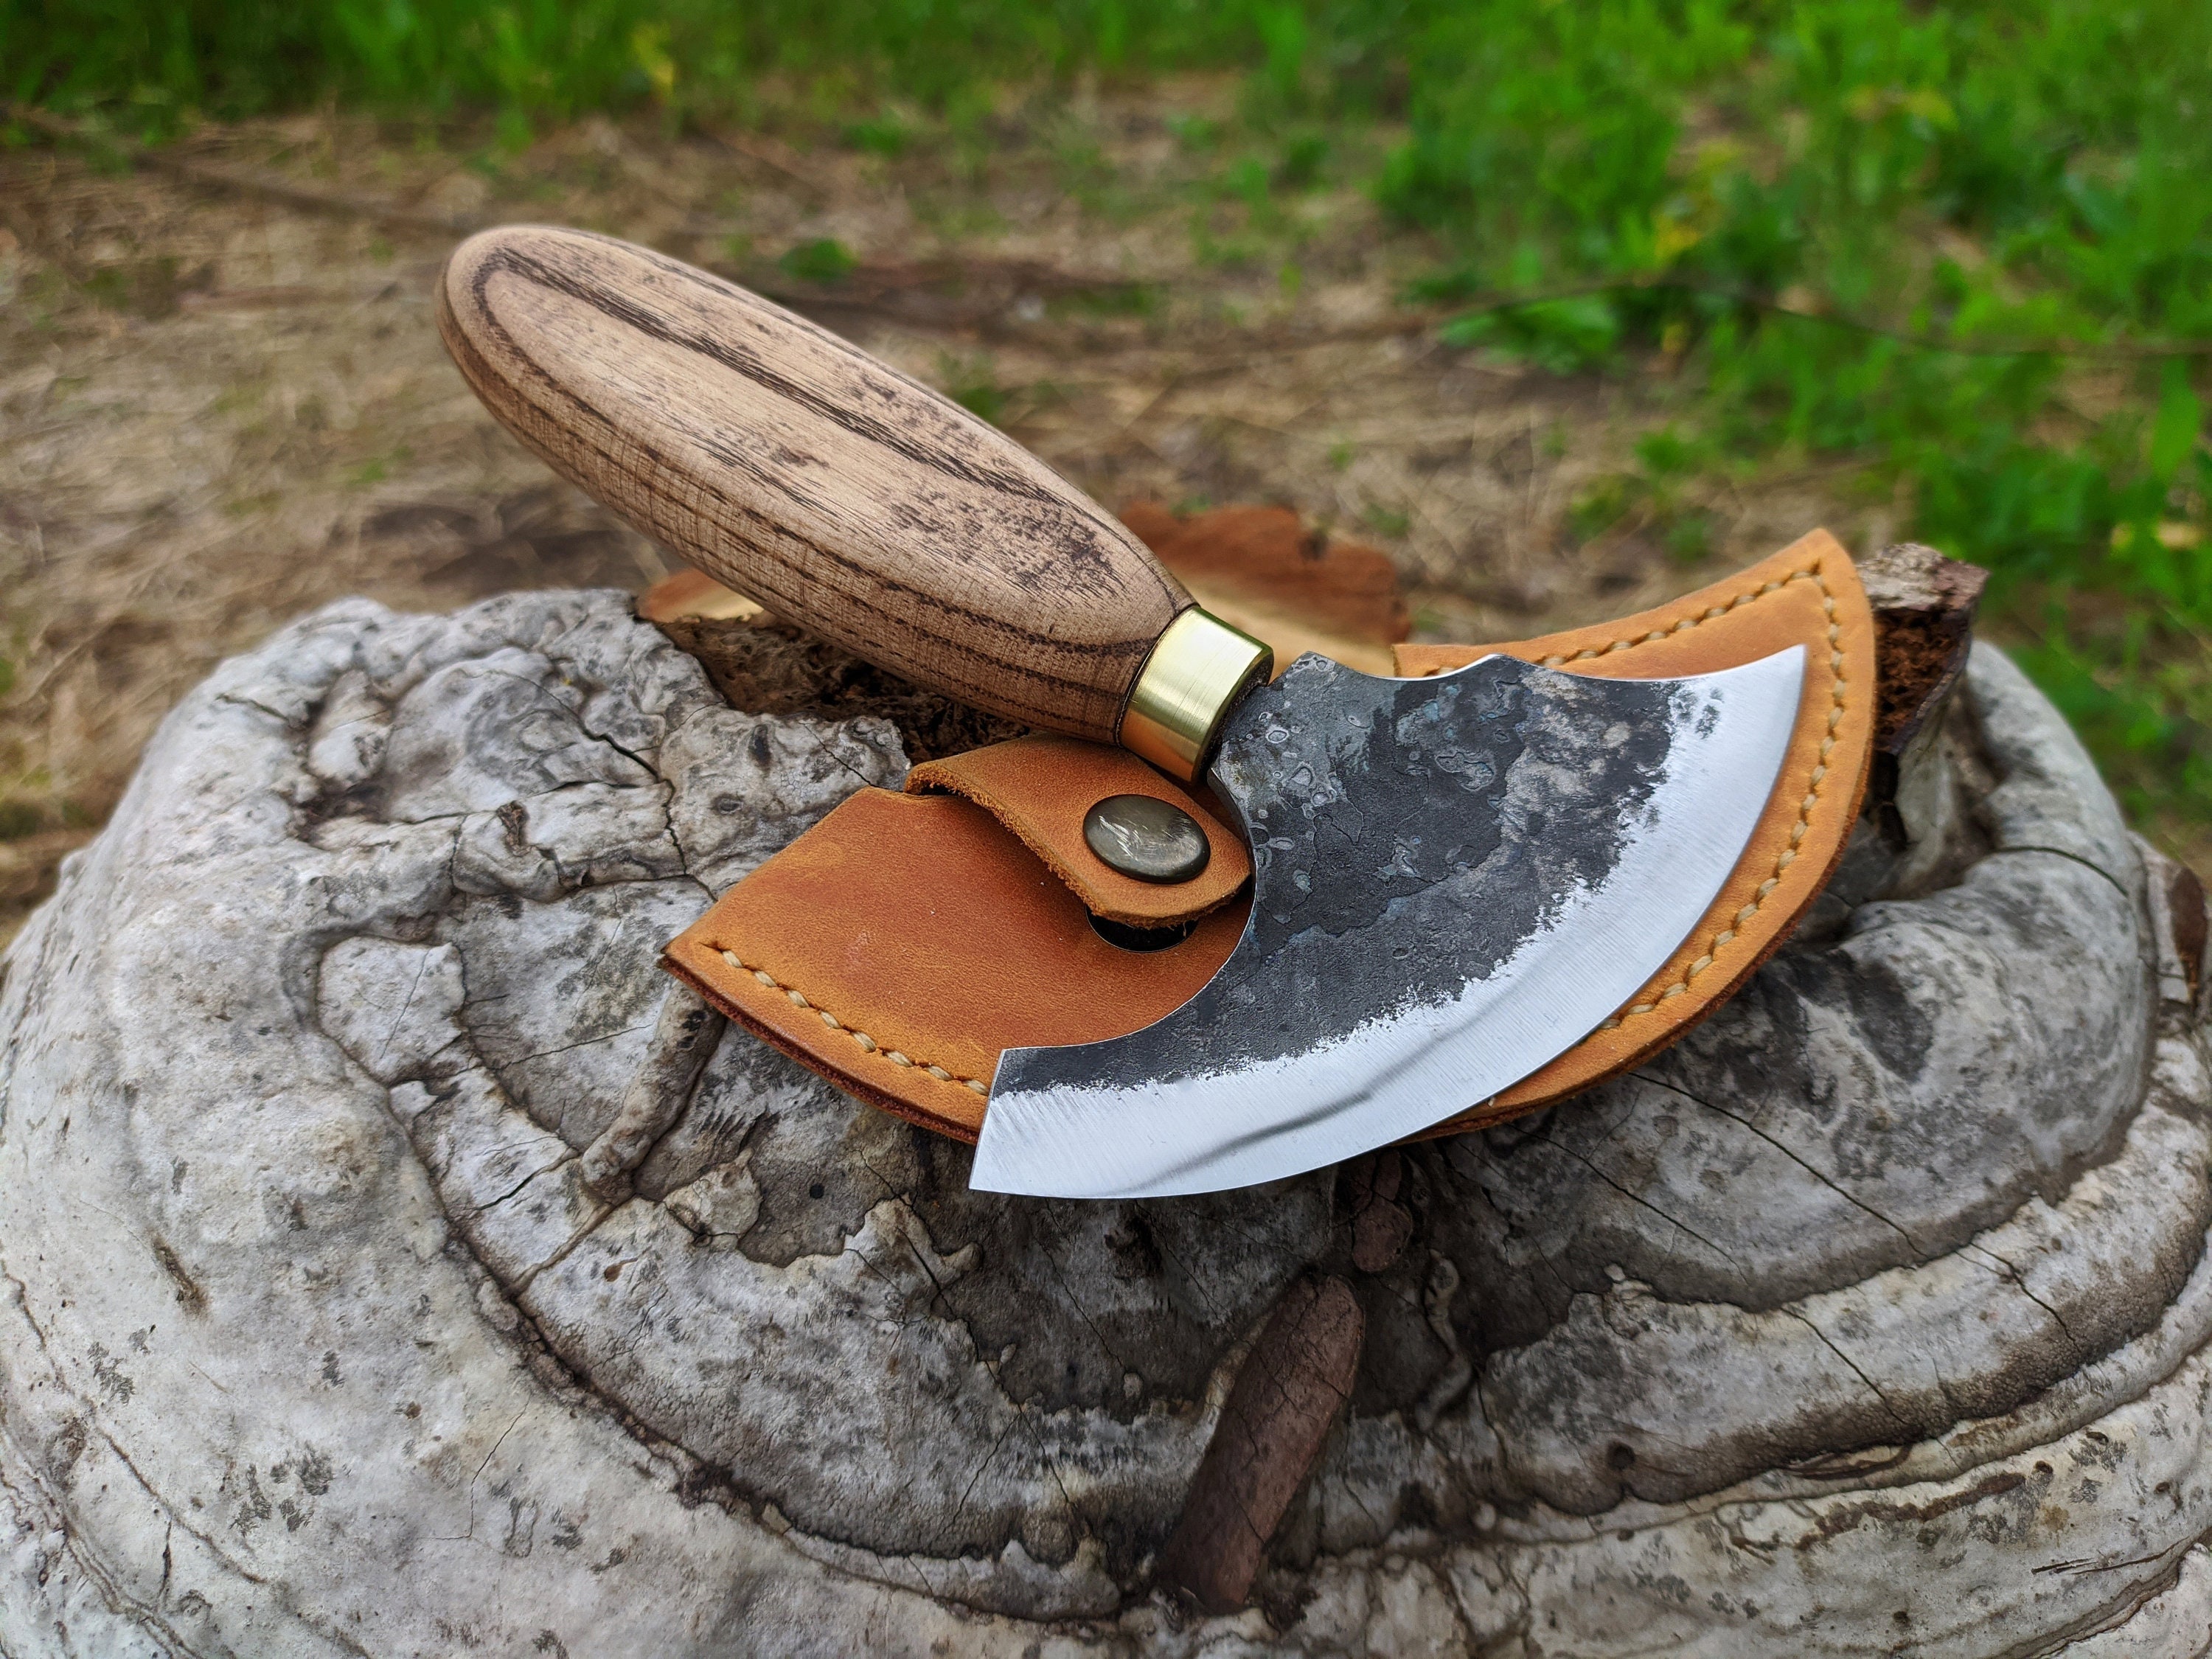 Handmade Damascus Steel Leather Cutter/ Round Head Leather Knife